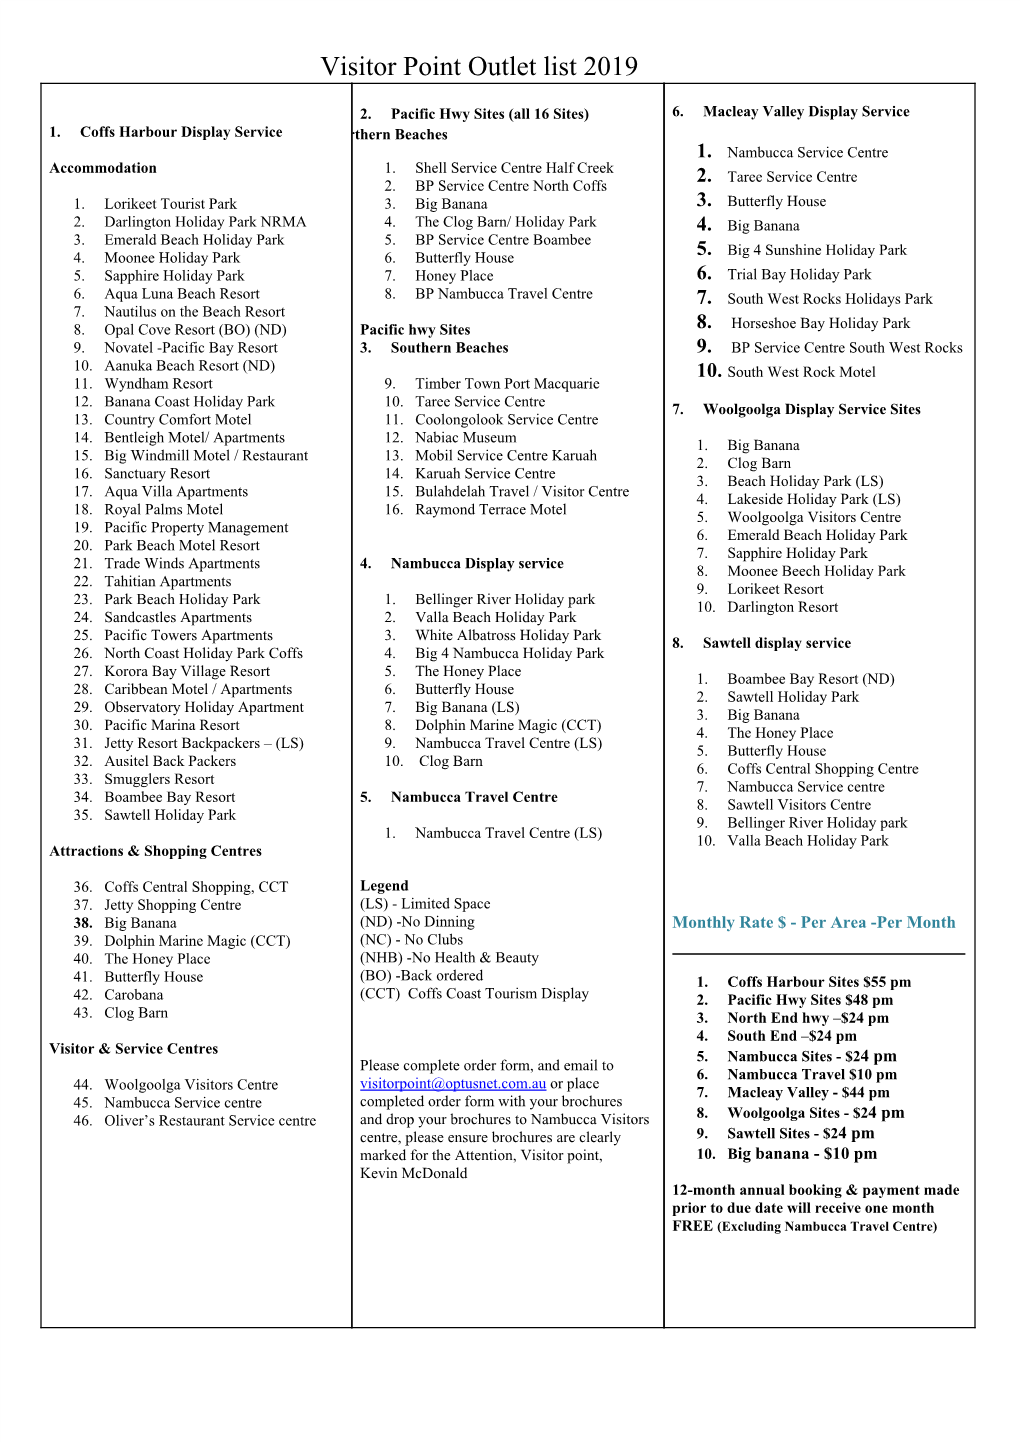 Visitor Point Outlet List 2019